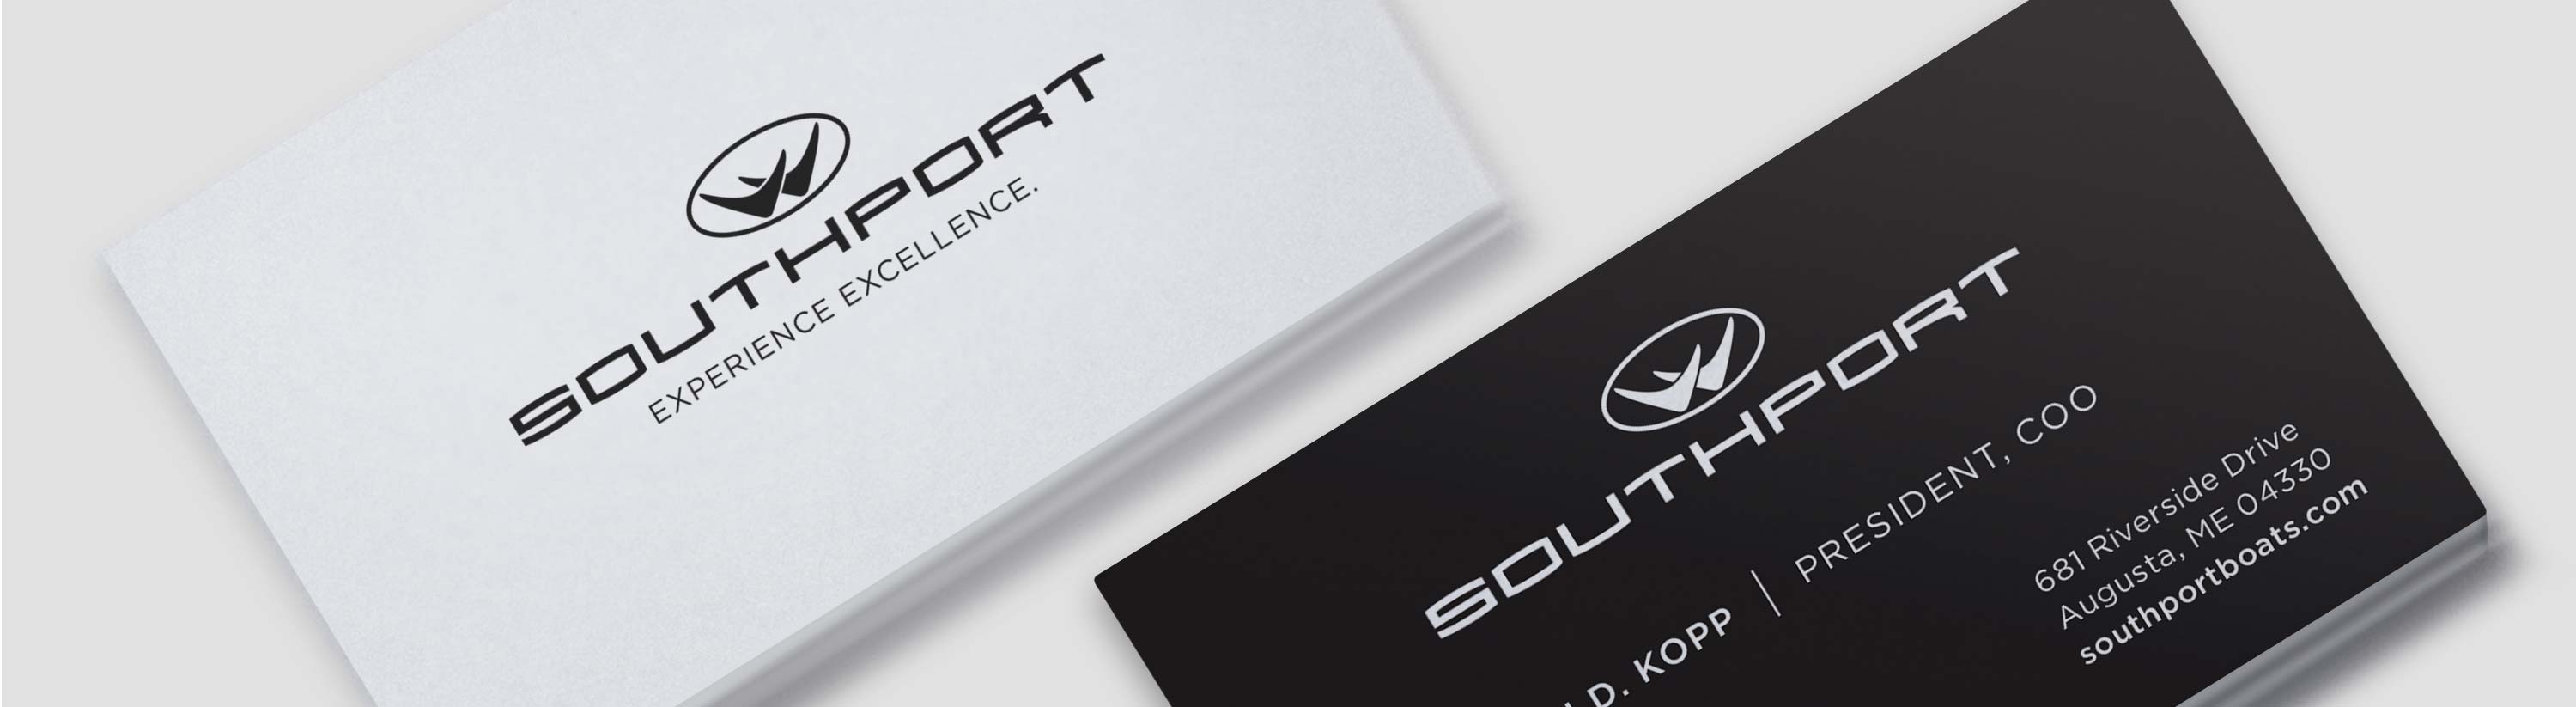 Southport Boats black and white business cards